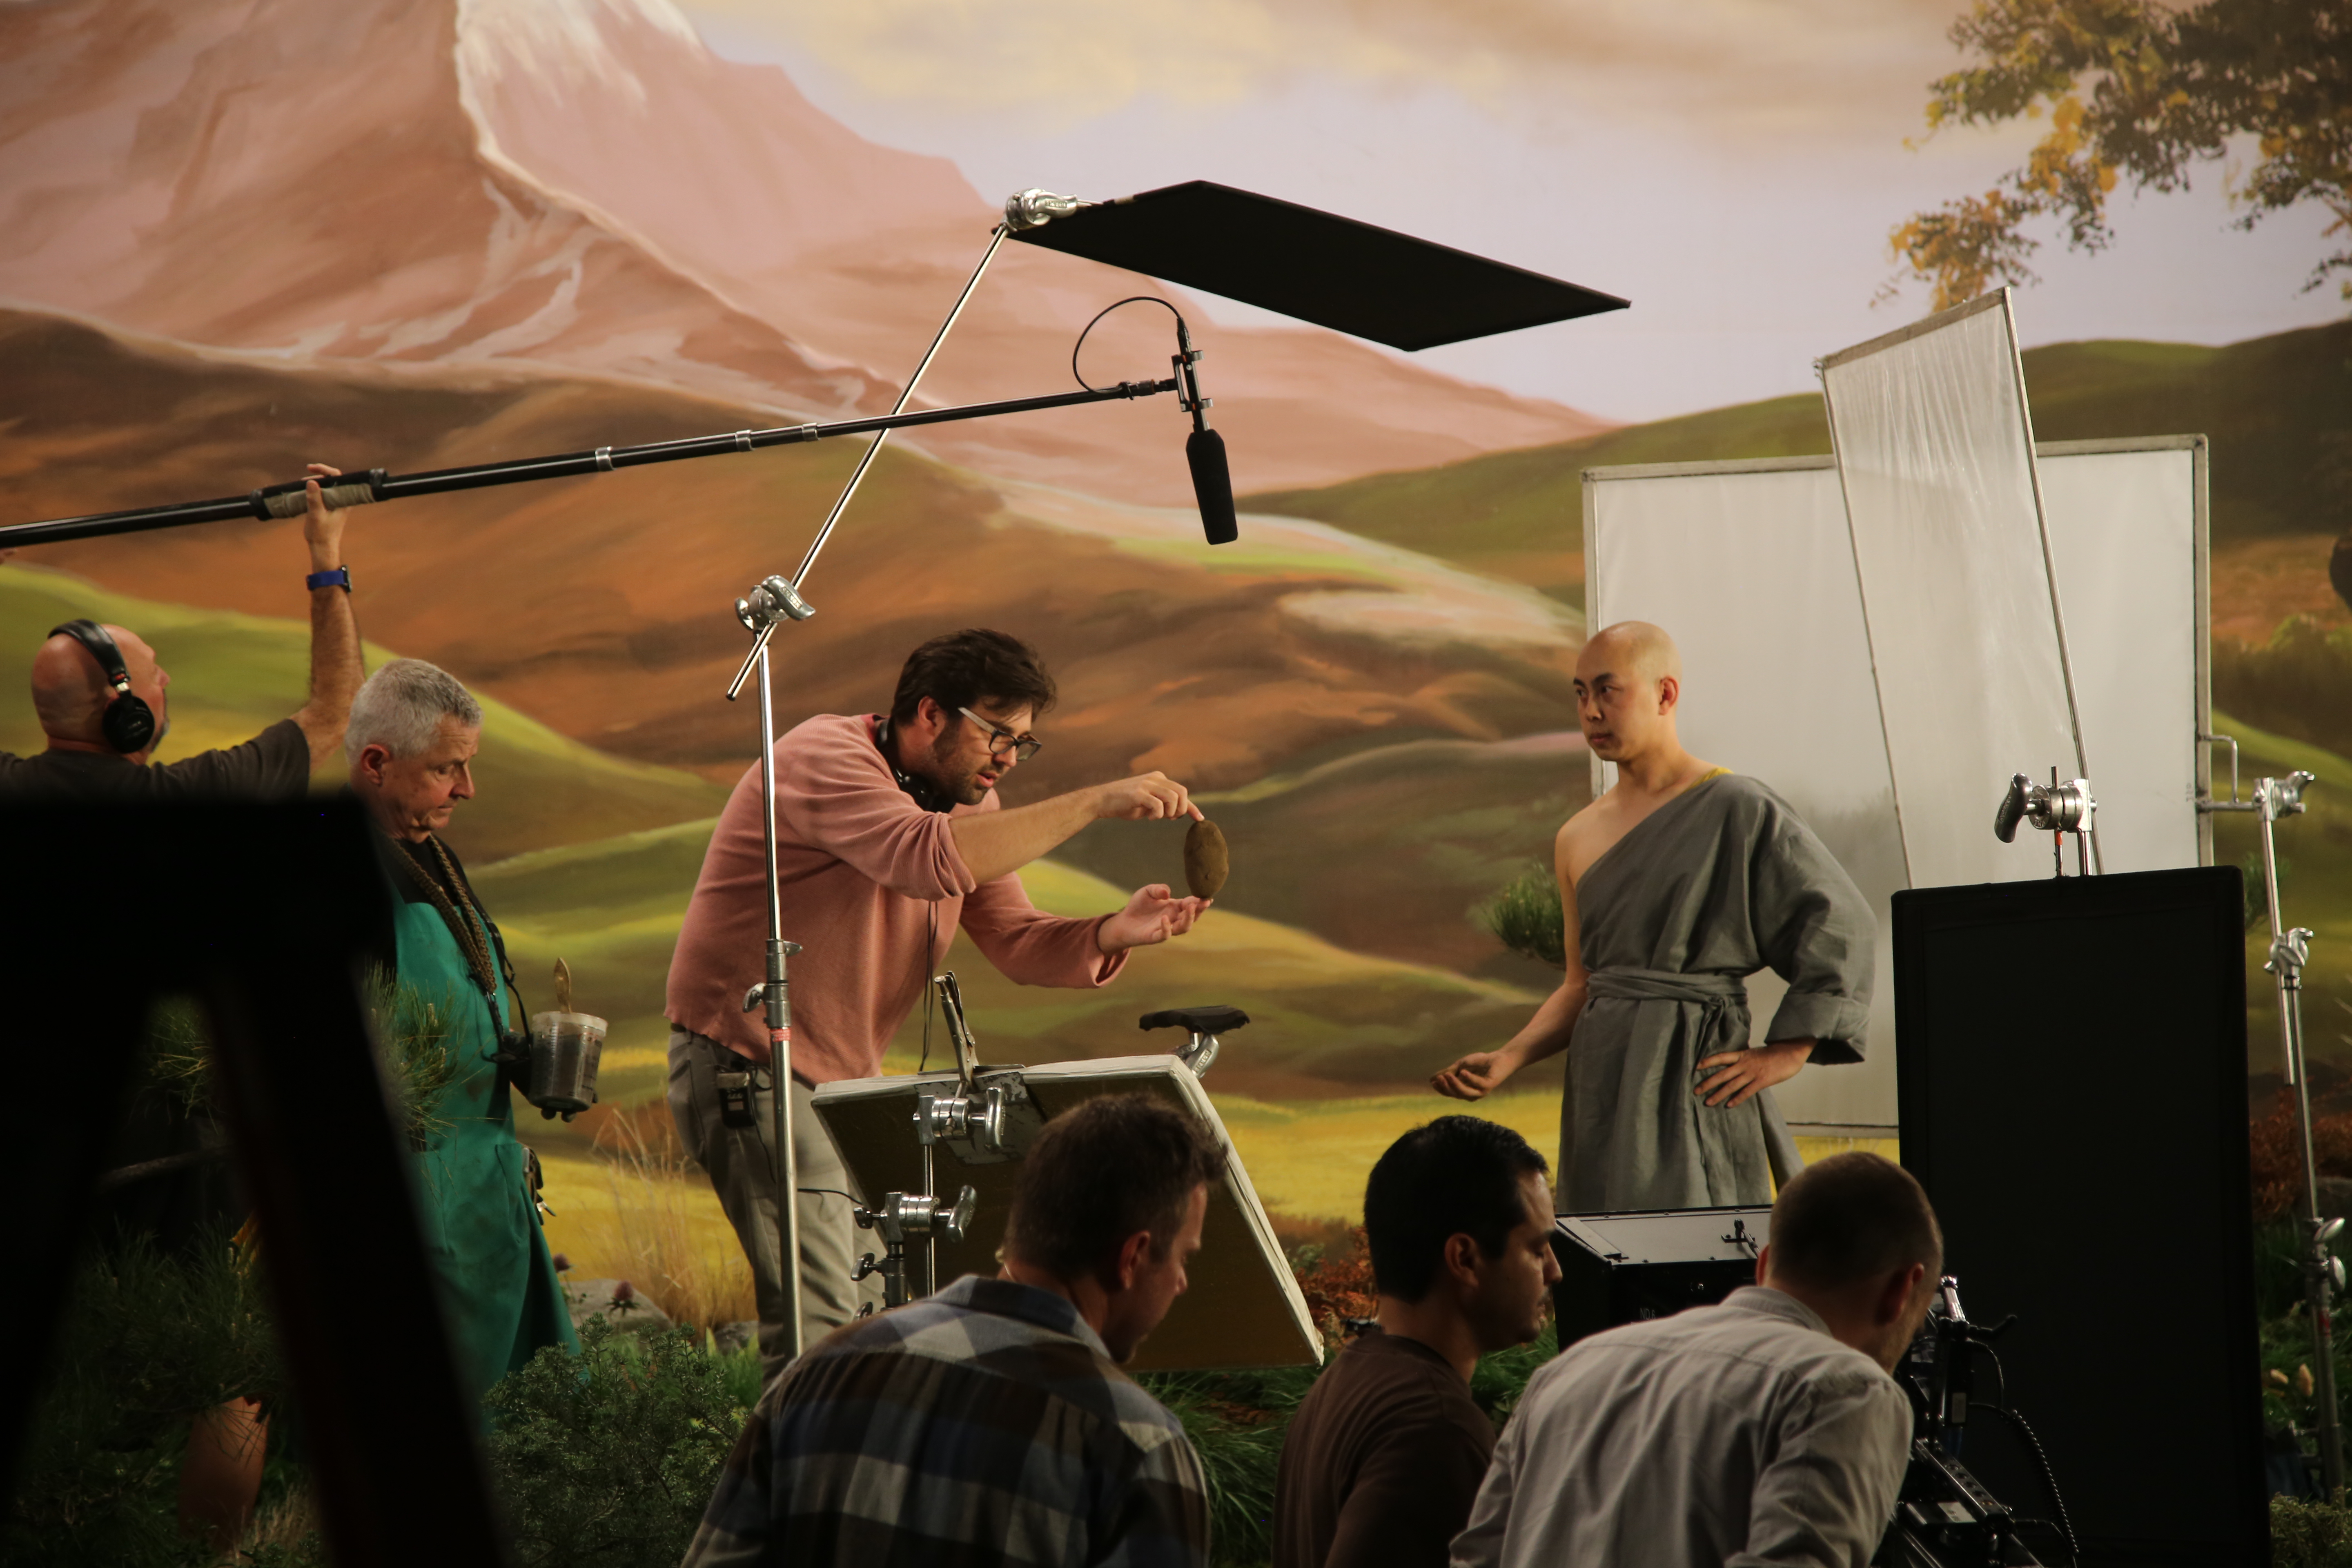 Director Michael Mohan on the set of a Ruffles potato chip commercial.